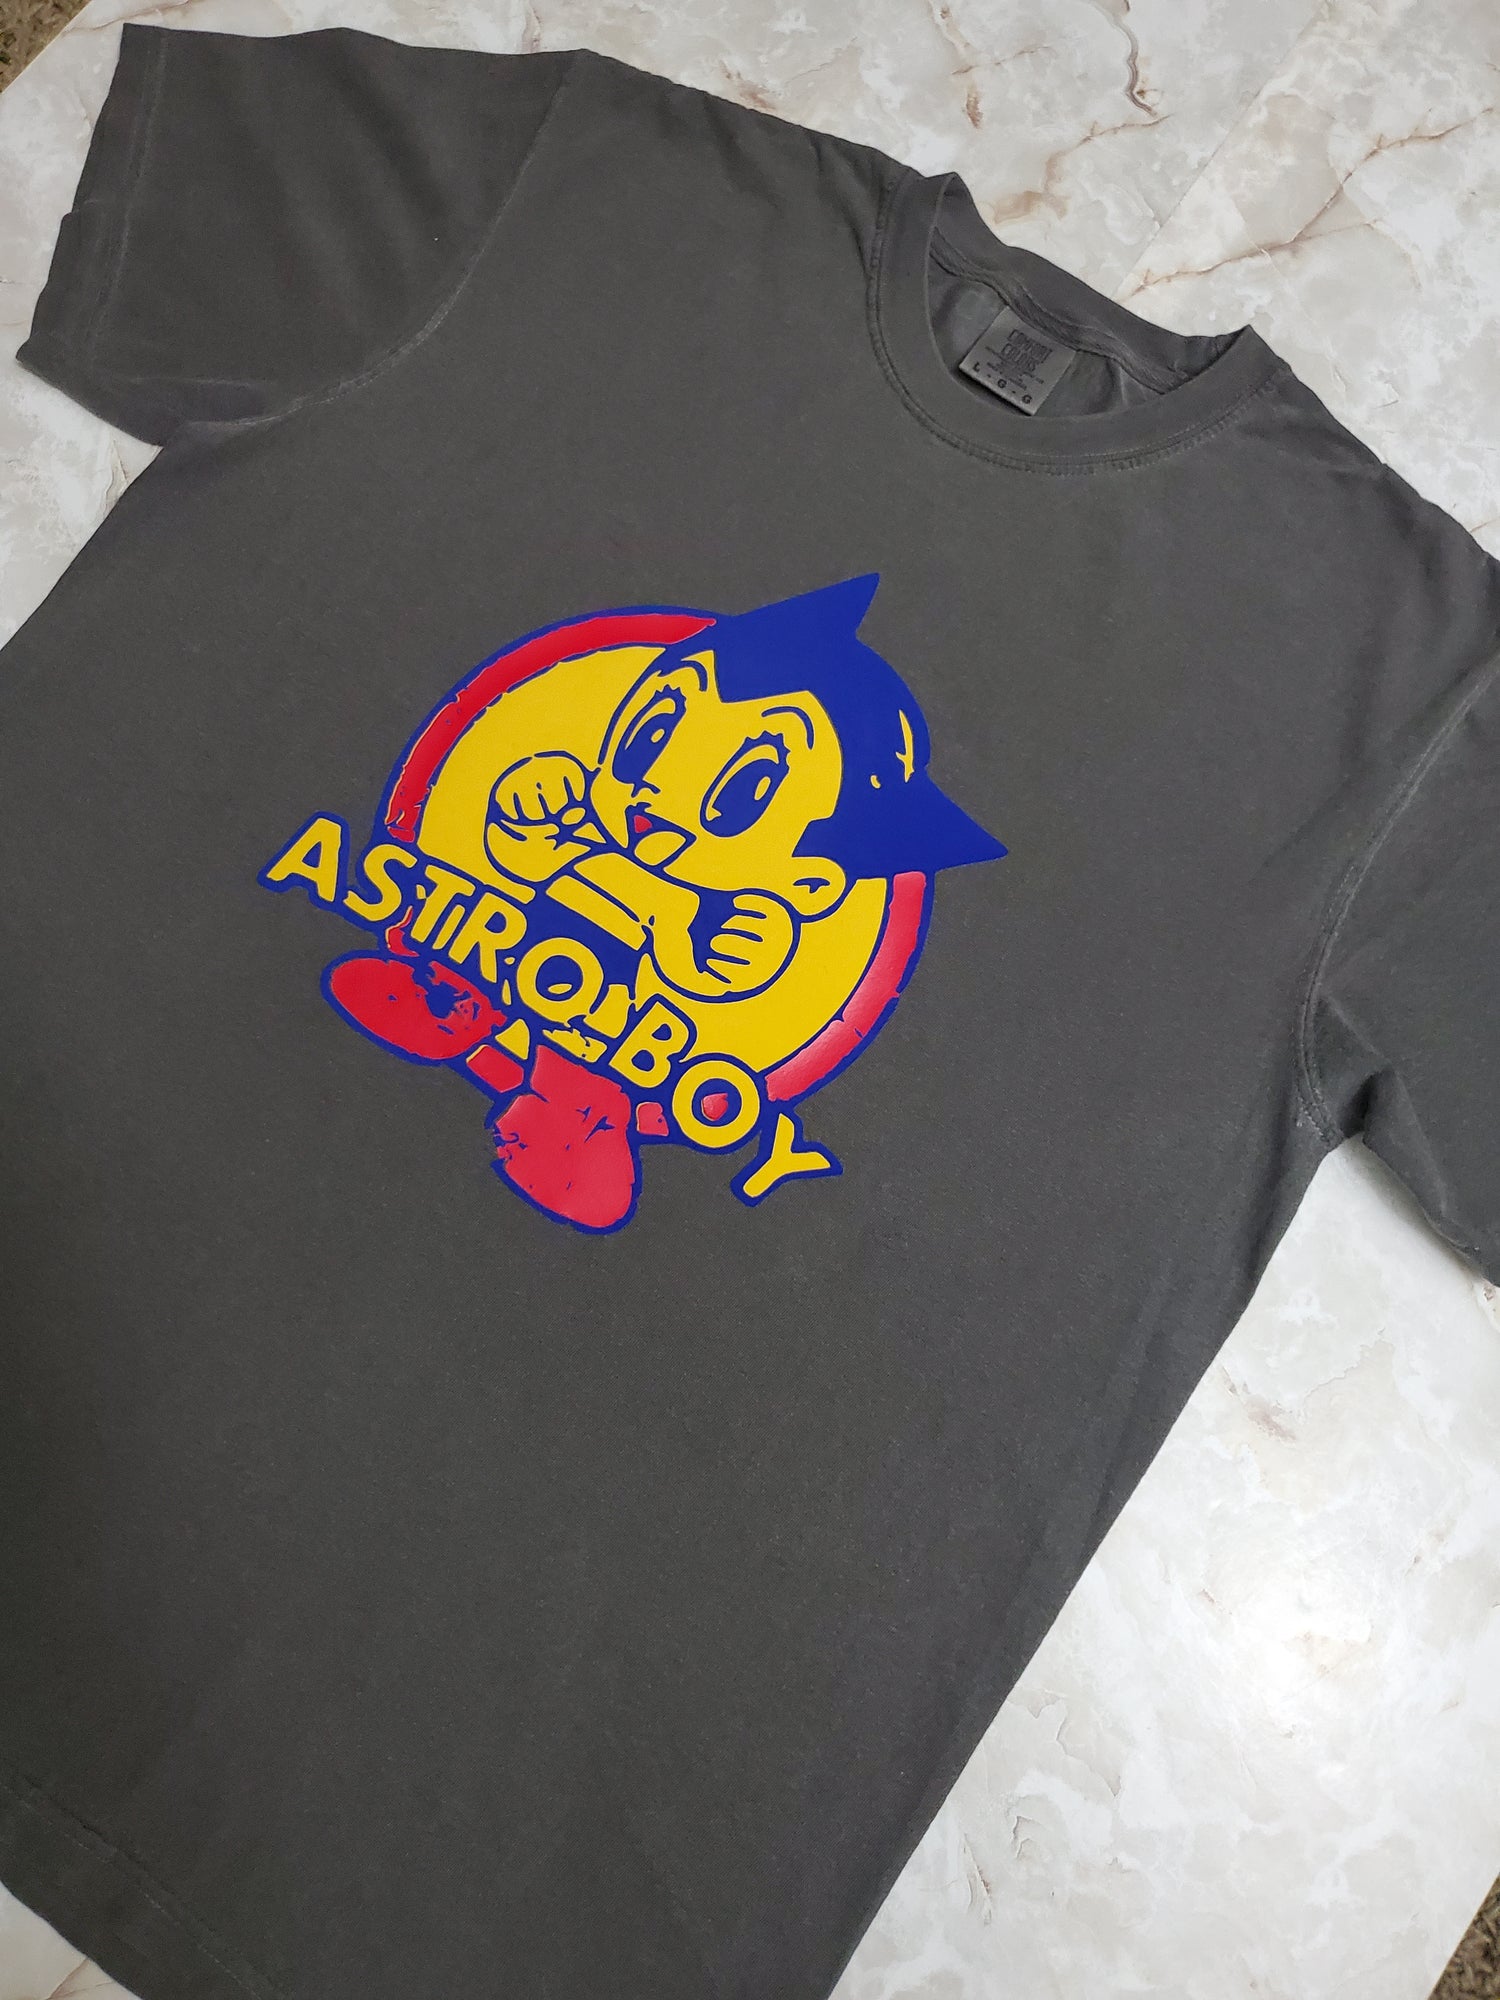 Astro Boy T-Shirt - Centre Ave Clothing Co.